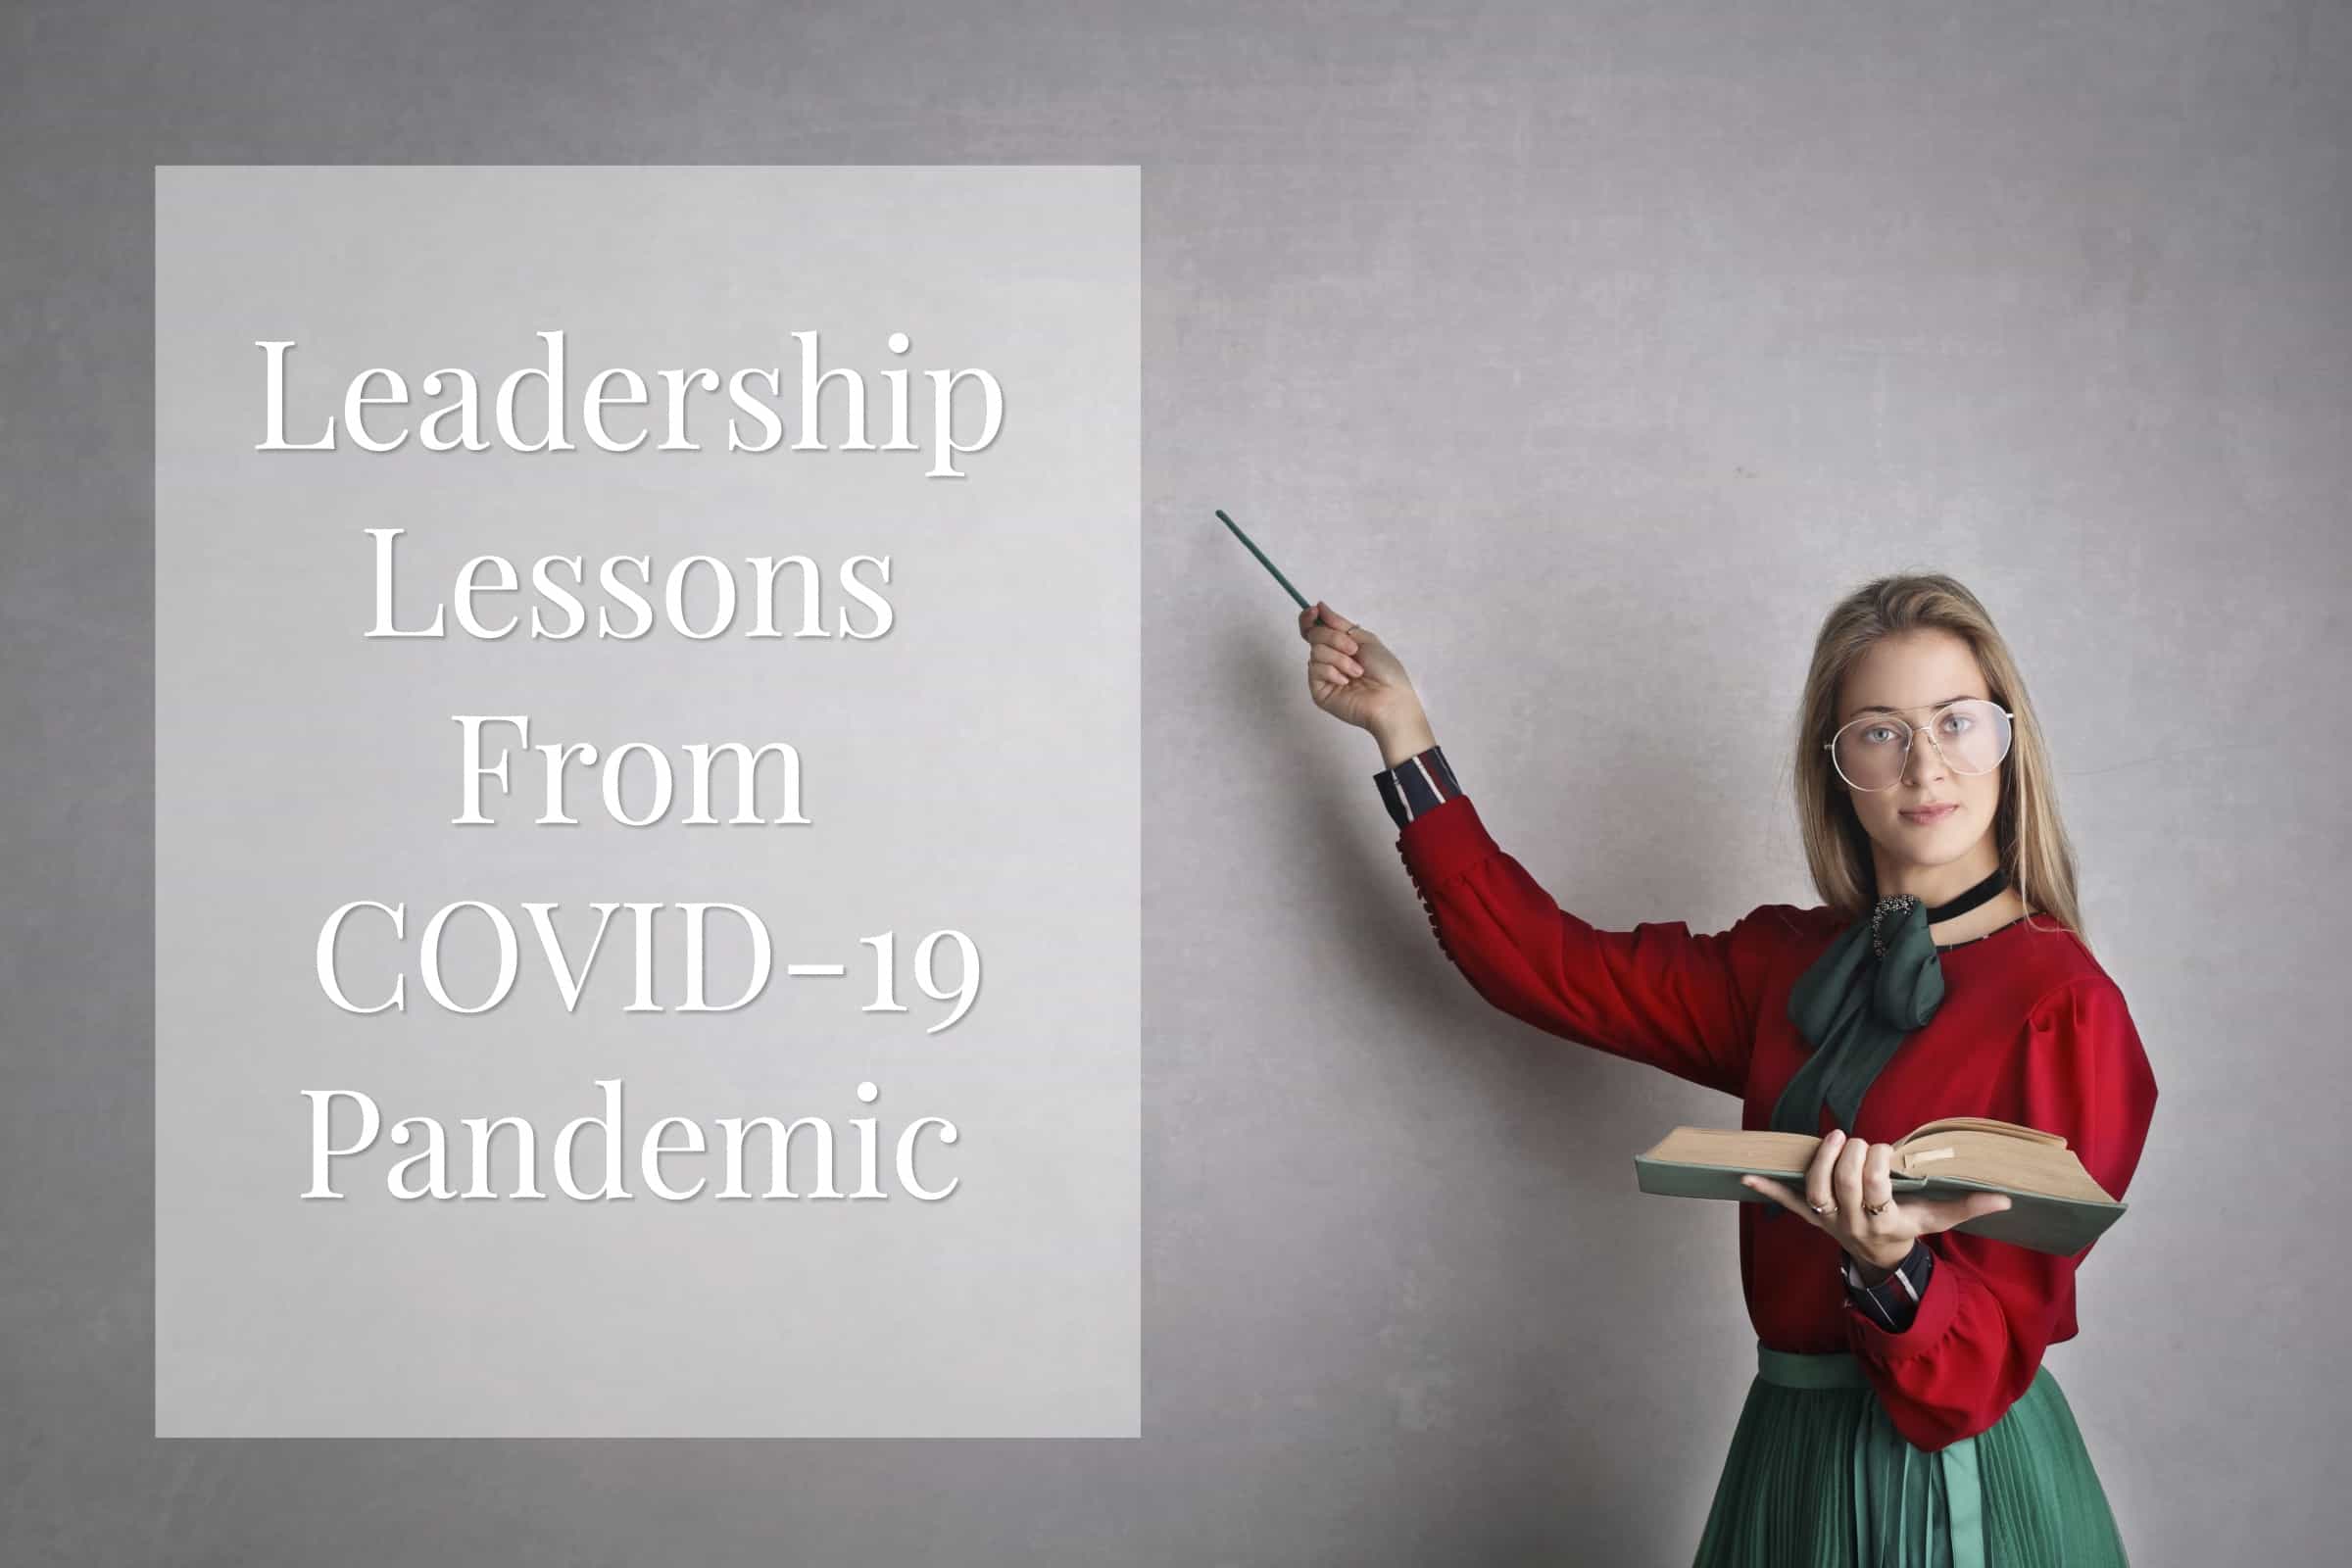 Leadership Lessons from COVID-19 Pandemic